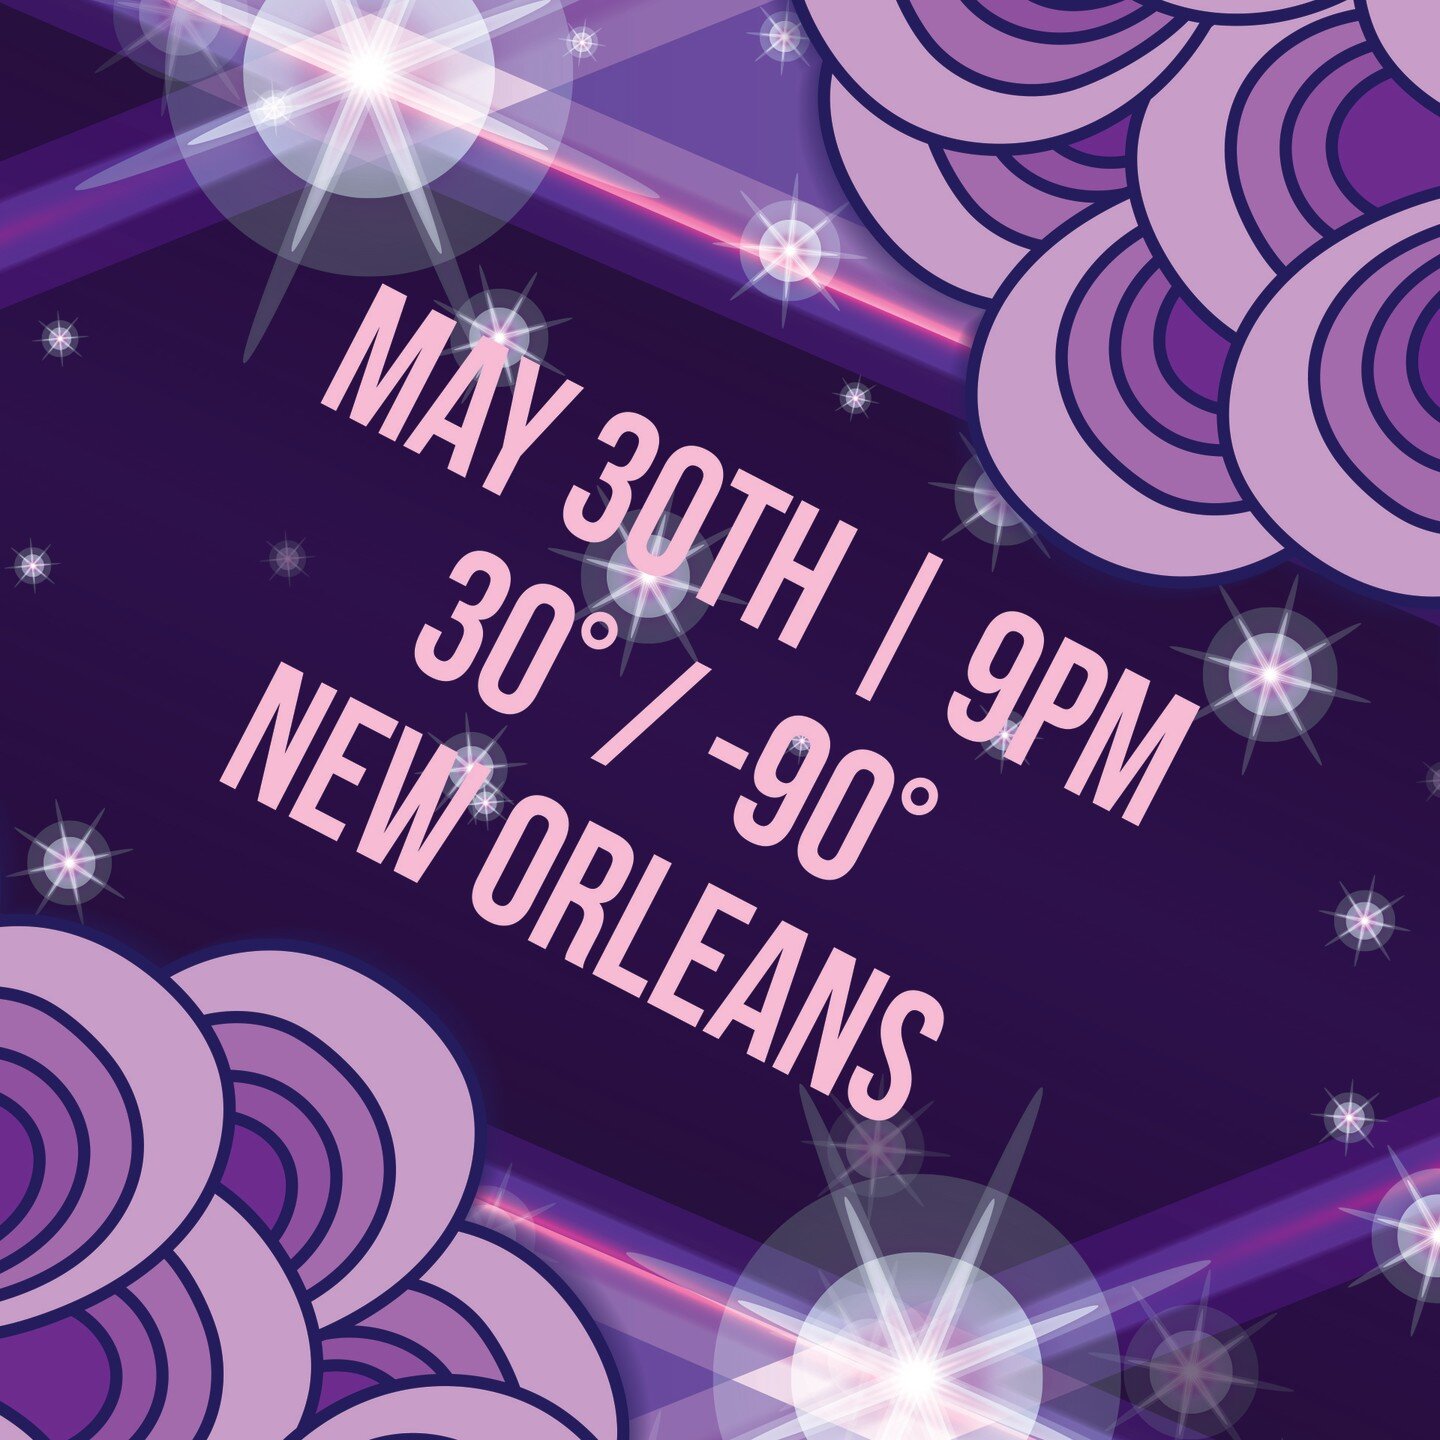 2nd #NOLA #tour gig is at @3090_nola on may 30th

@lilchota @hjh18885 @jesstermix77